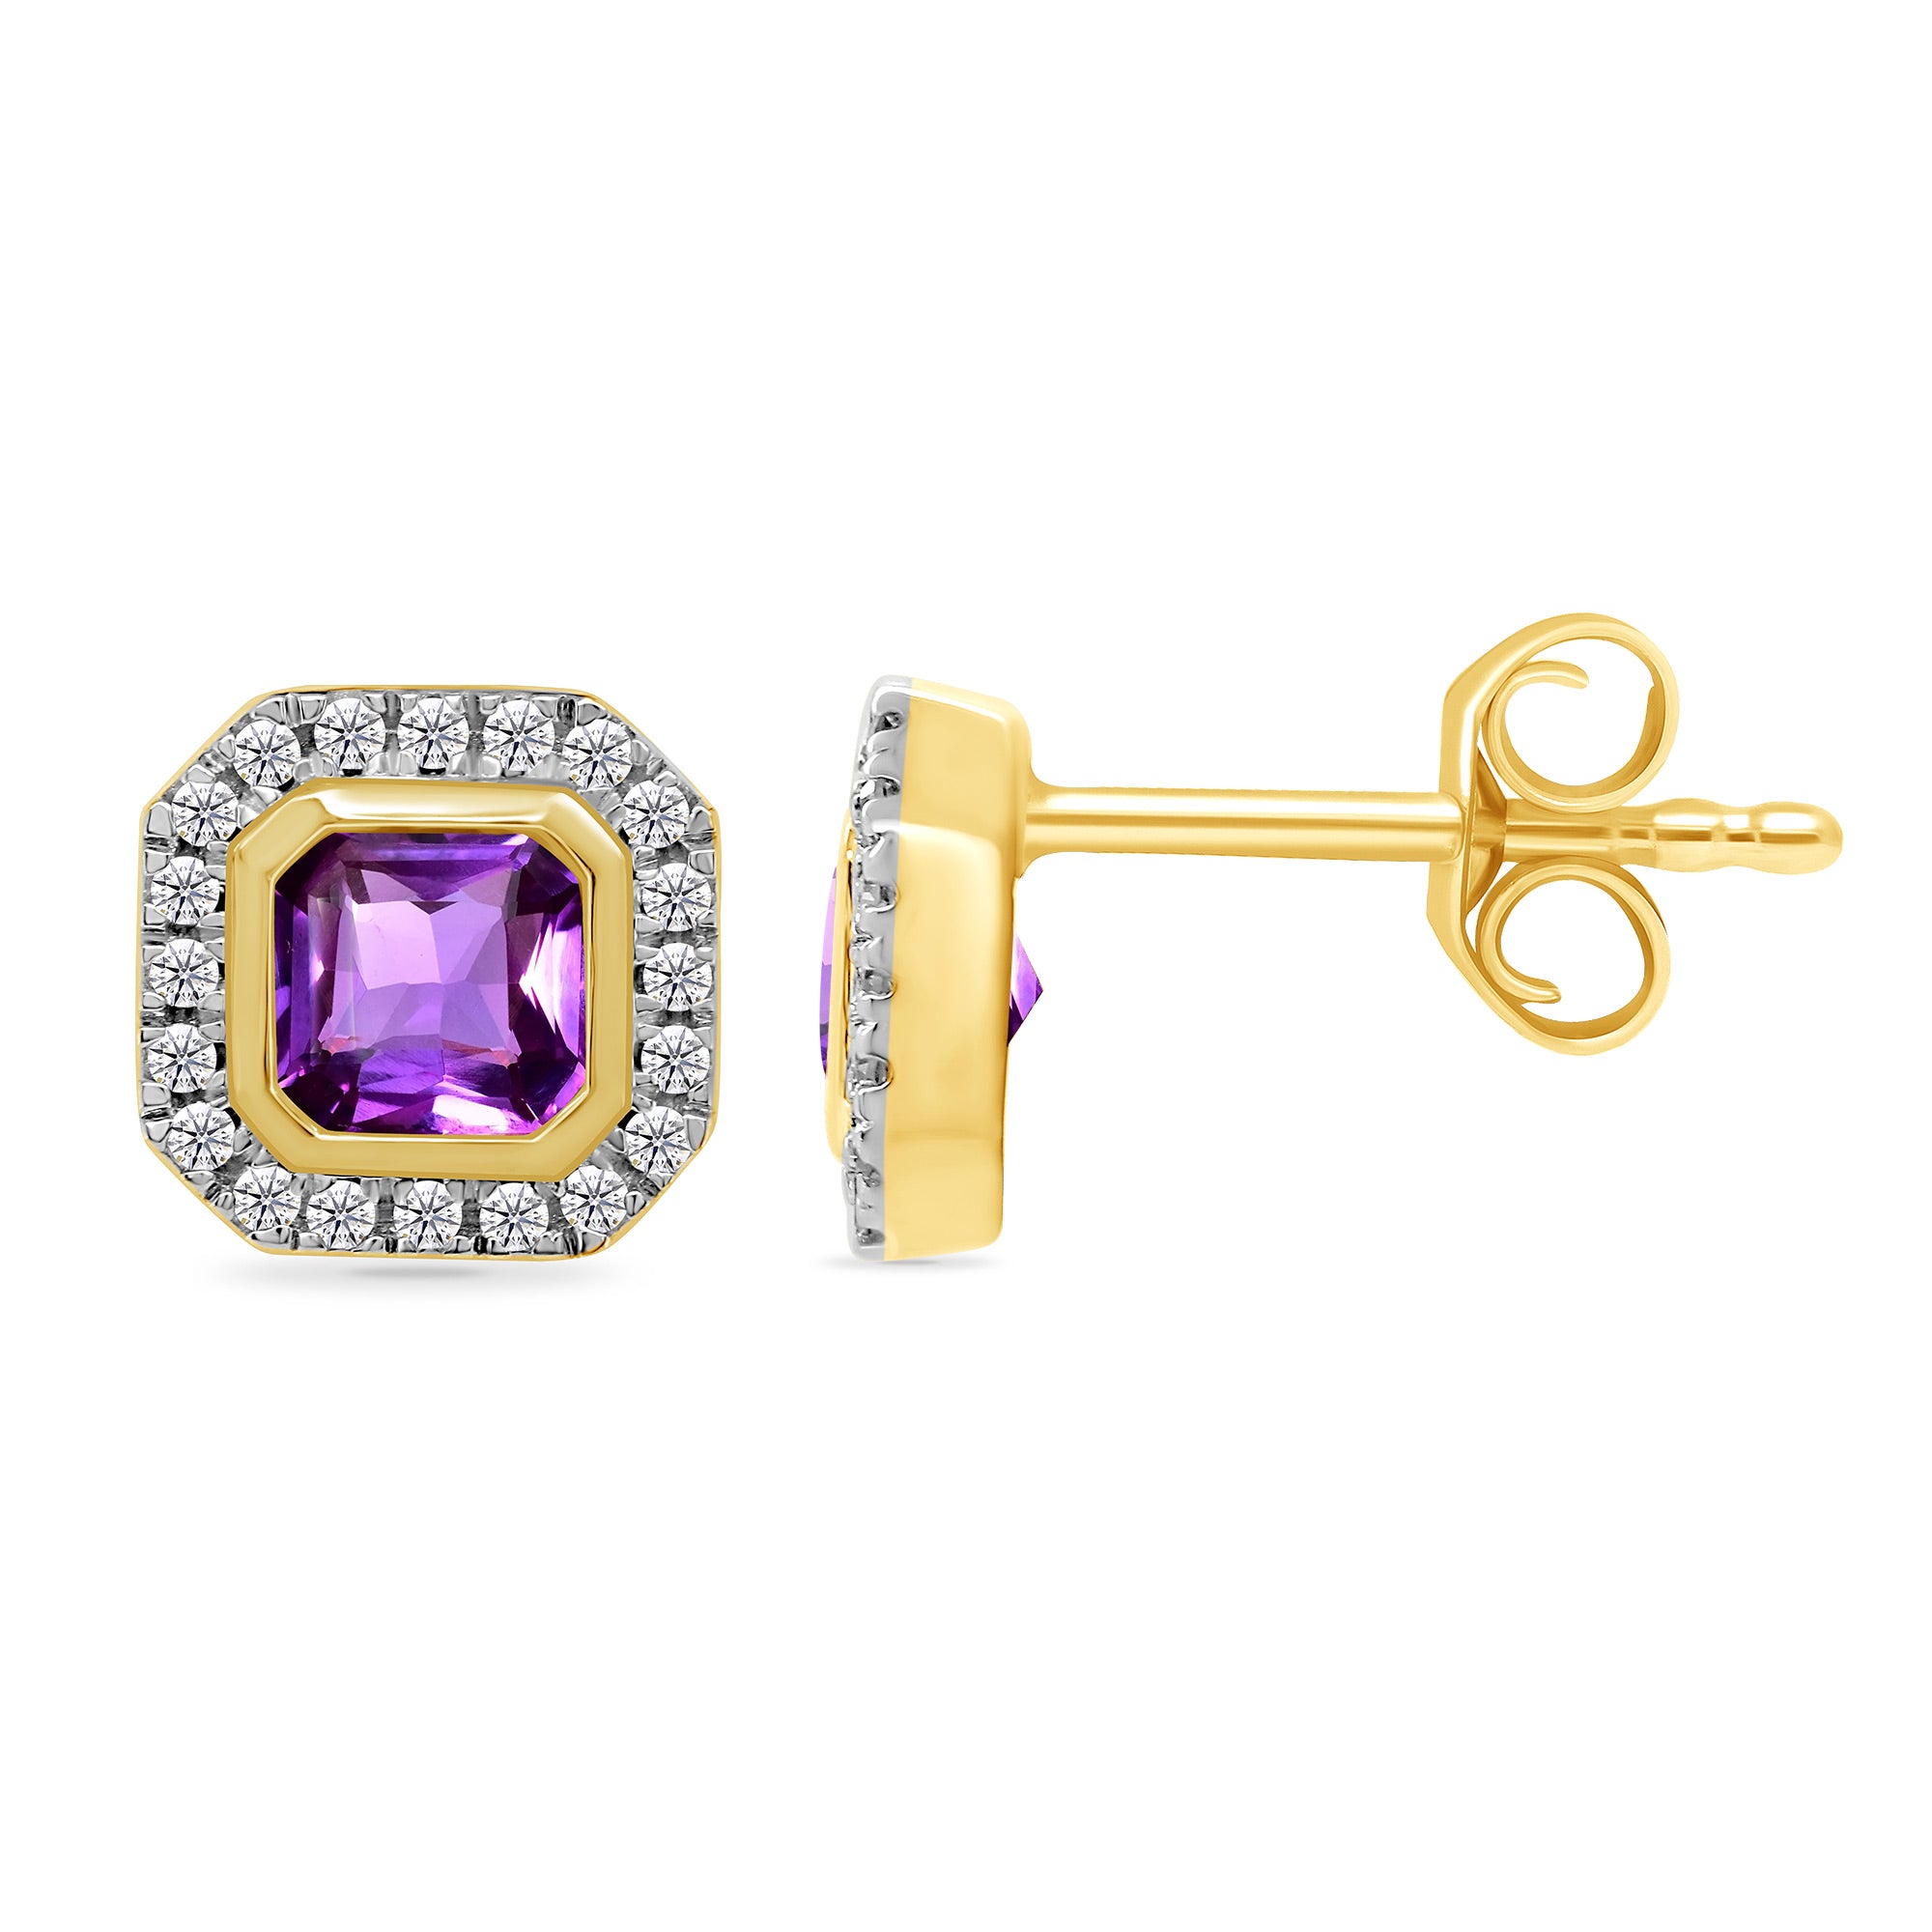 9ct gold 4mm square amethyst & diamond cluster stud earrings 0.13ct